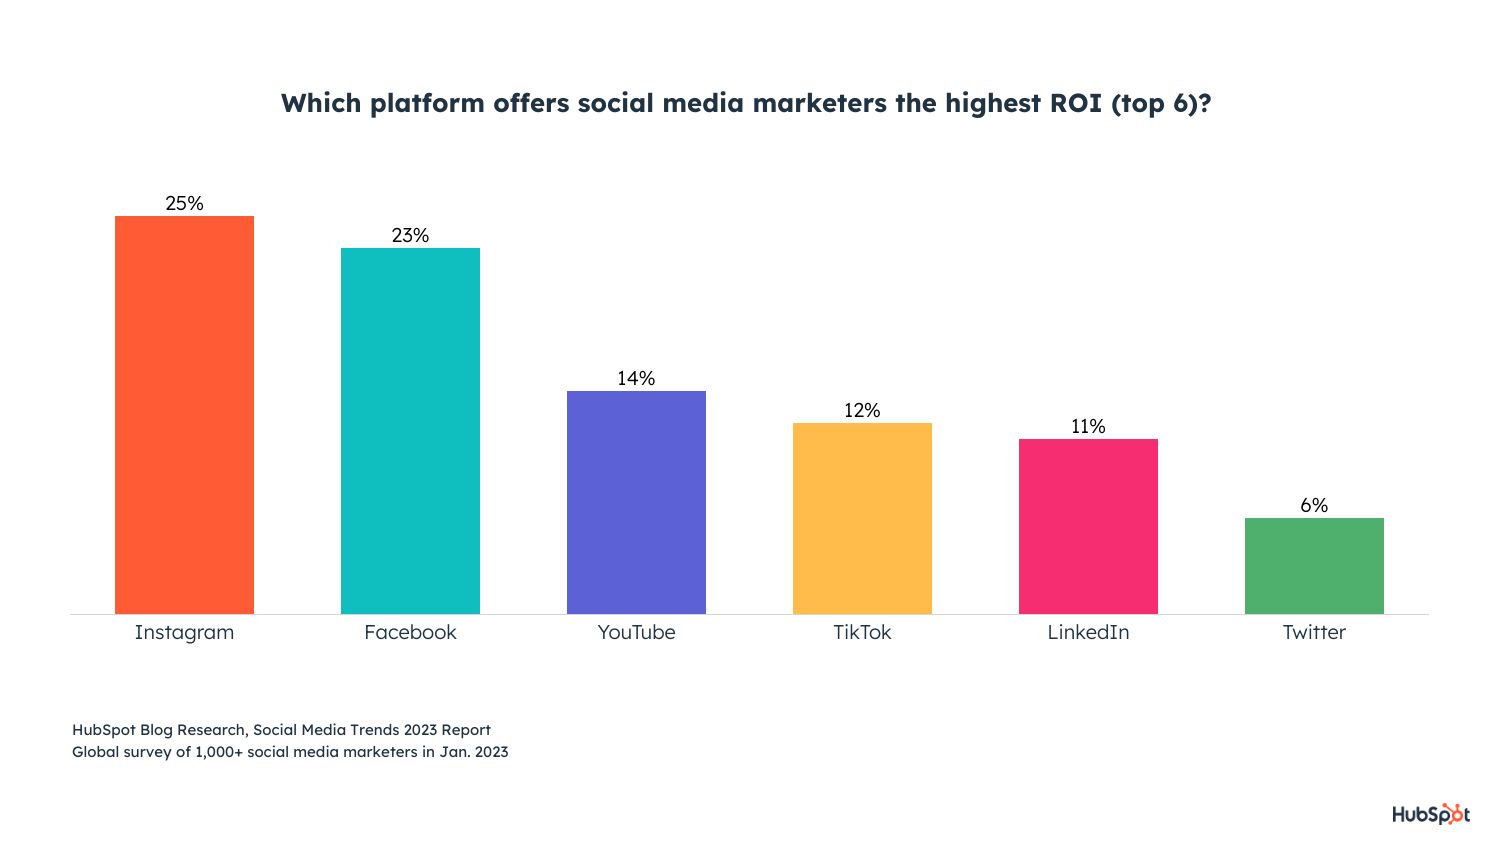 the social media platform that offers the highest ROI